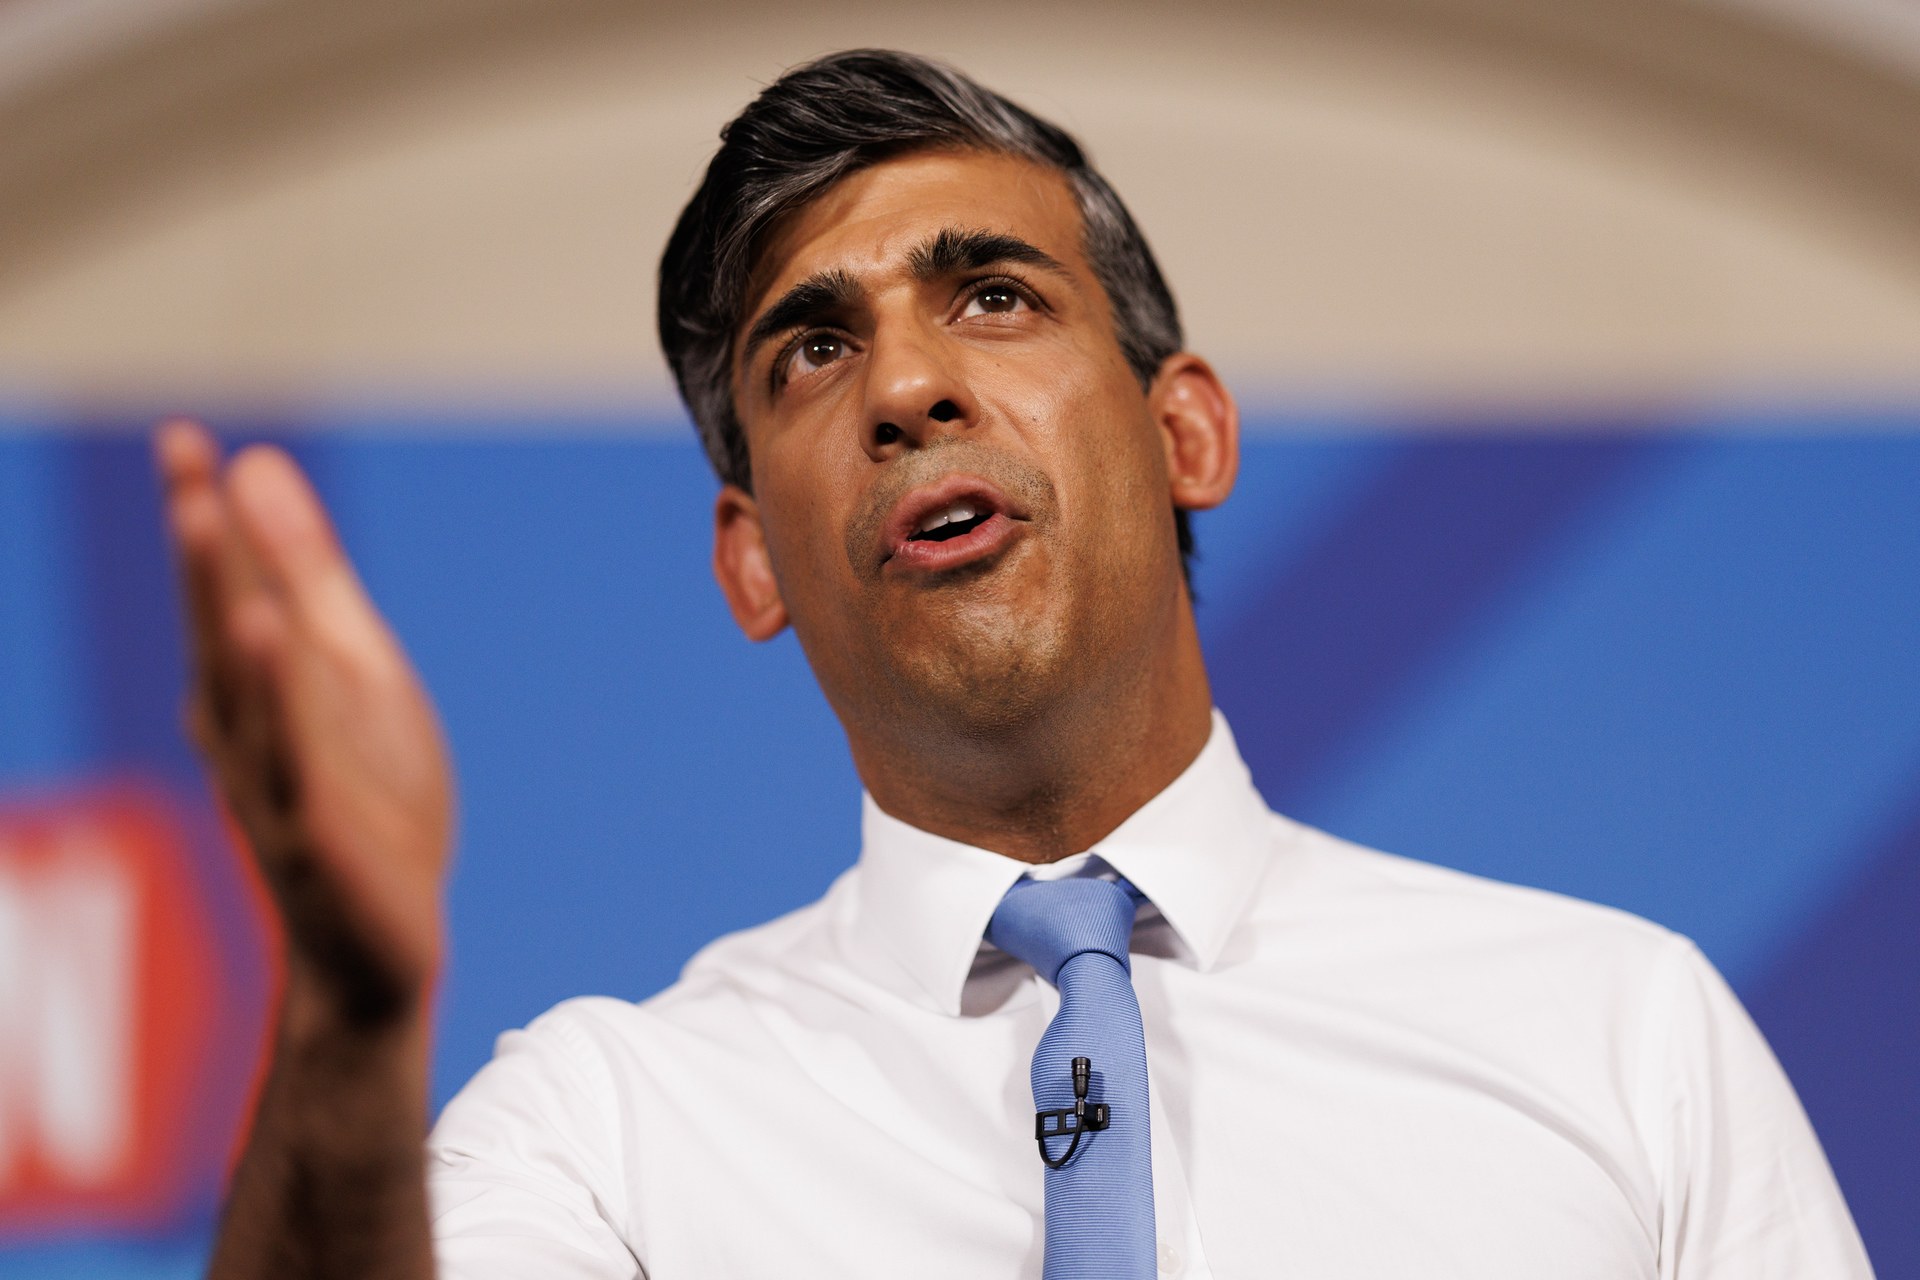 A Reform UK campaigner used a racial slur against Rishi Sunak, who is of Indian heritage.